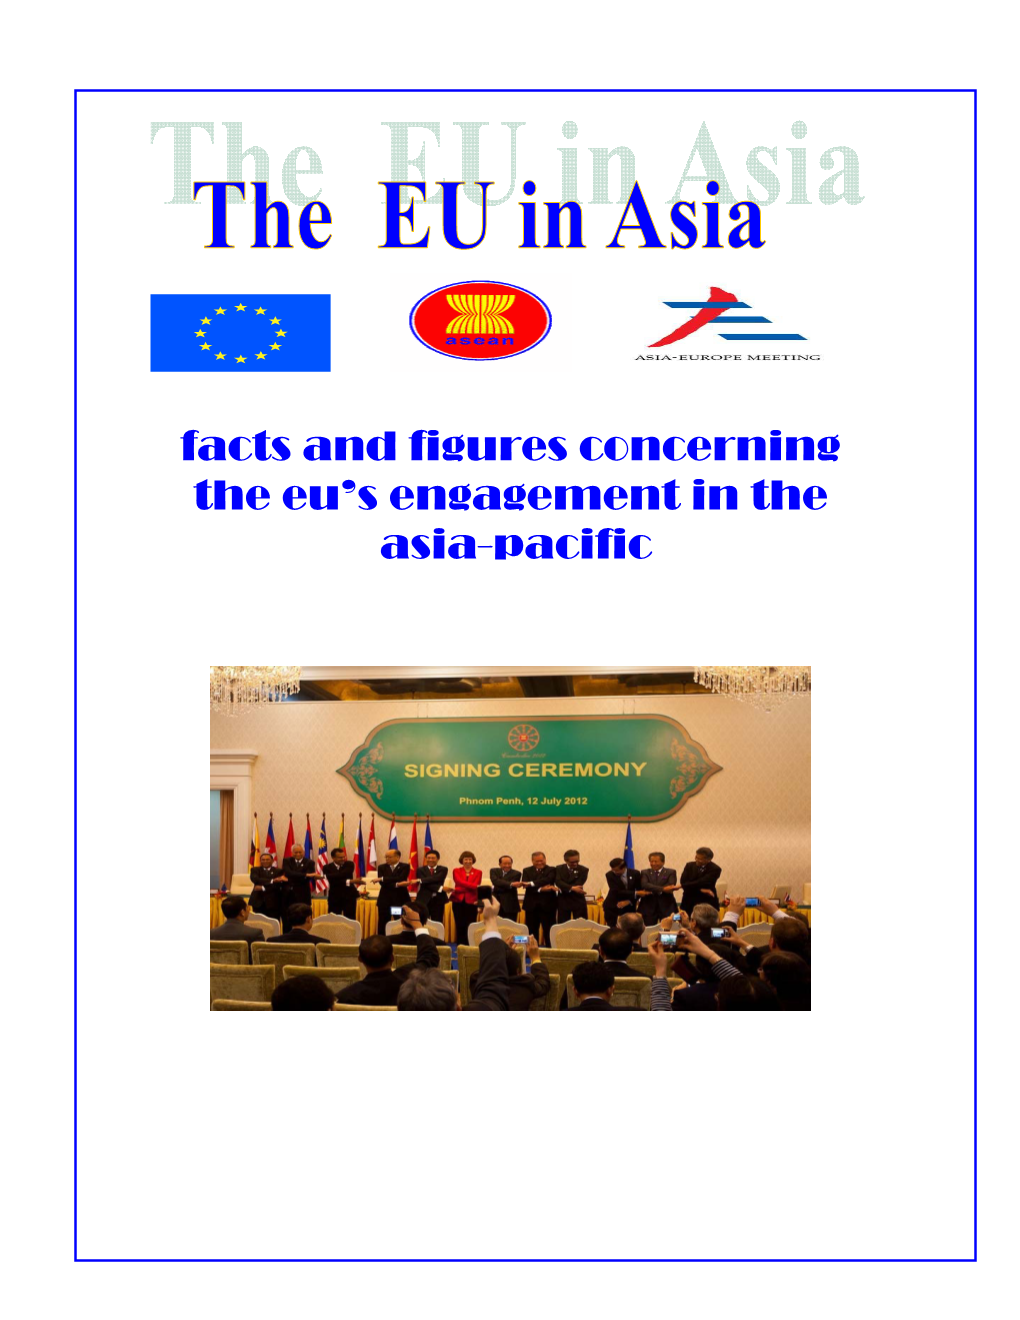 Facts and Figures Concerning the Eu's Engagement in the Asia-Pacific